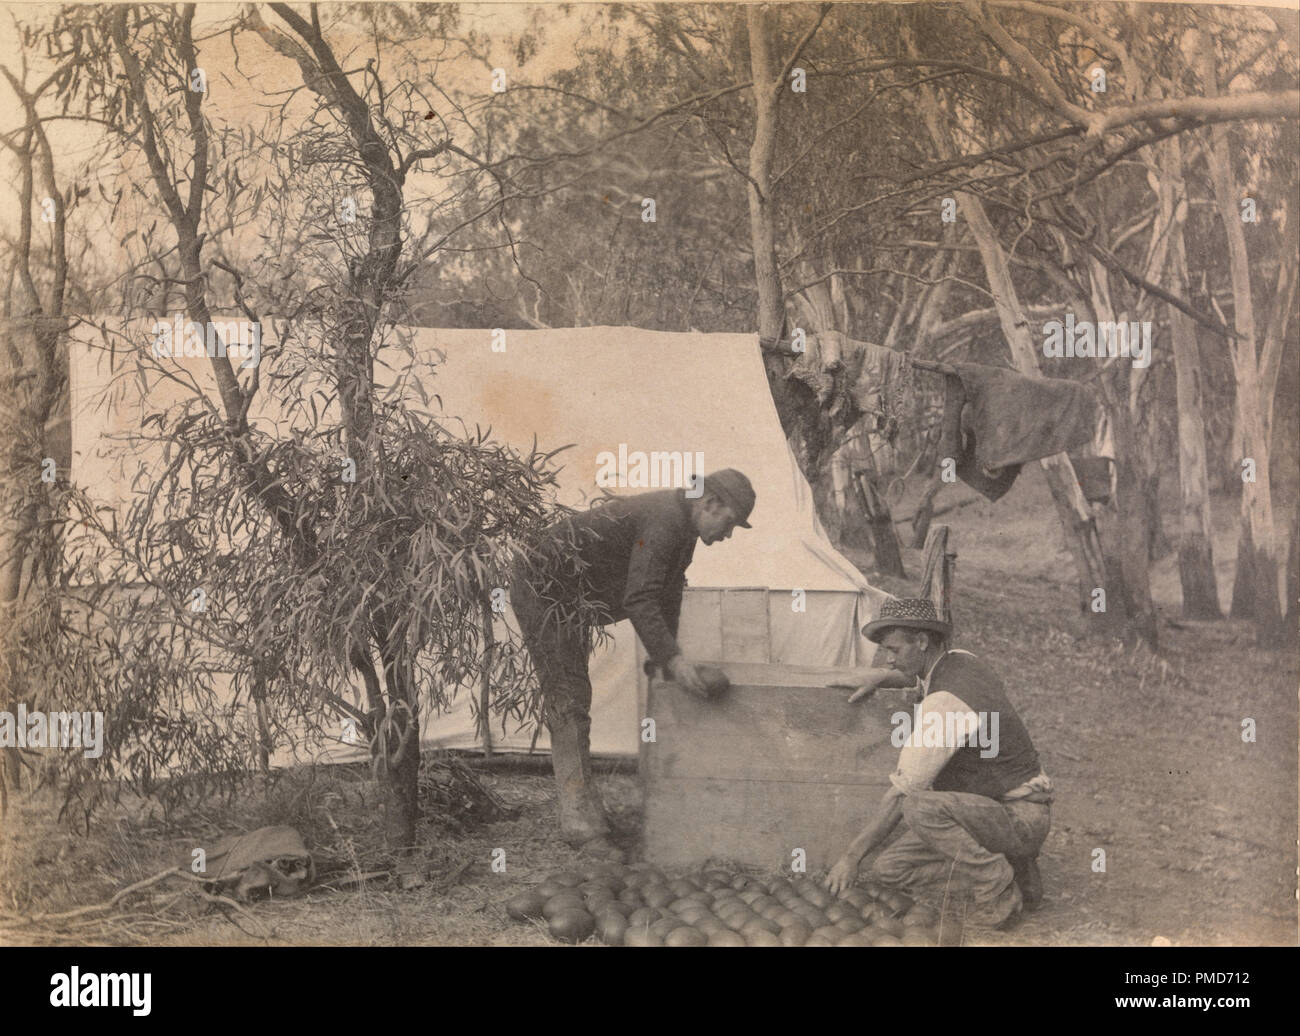 An Emu Eggers Camp. Date/Period: 1894 - 1895. Image. Photograph Photograph. Height: 109 mm (4.29 in); Width: 150 mm (5.90 in). Author: Archibald James Campbell. Stock Photo